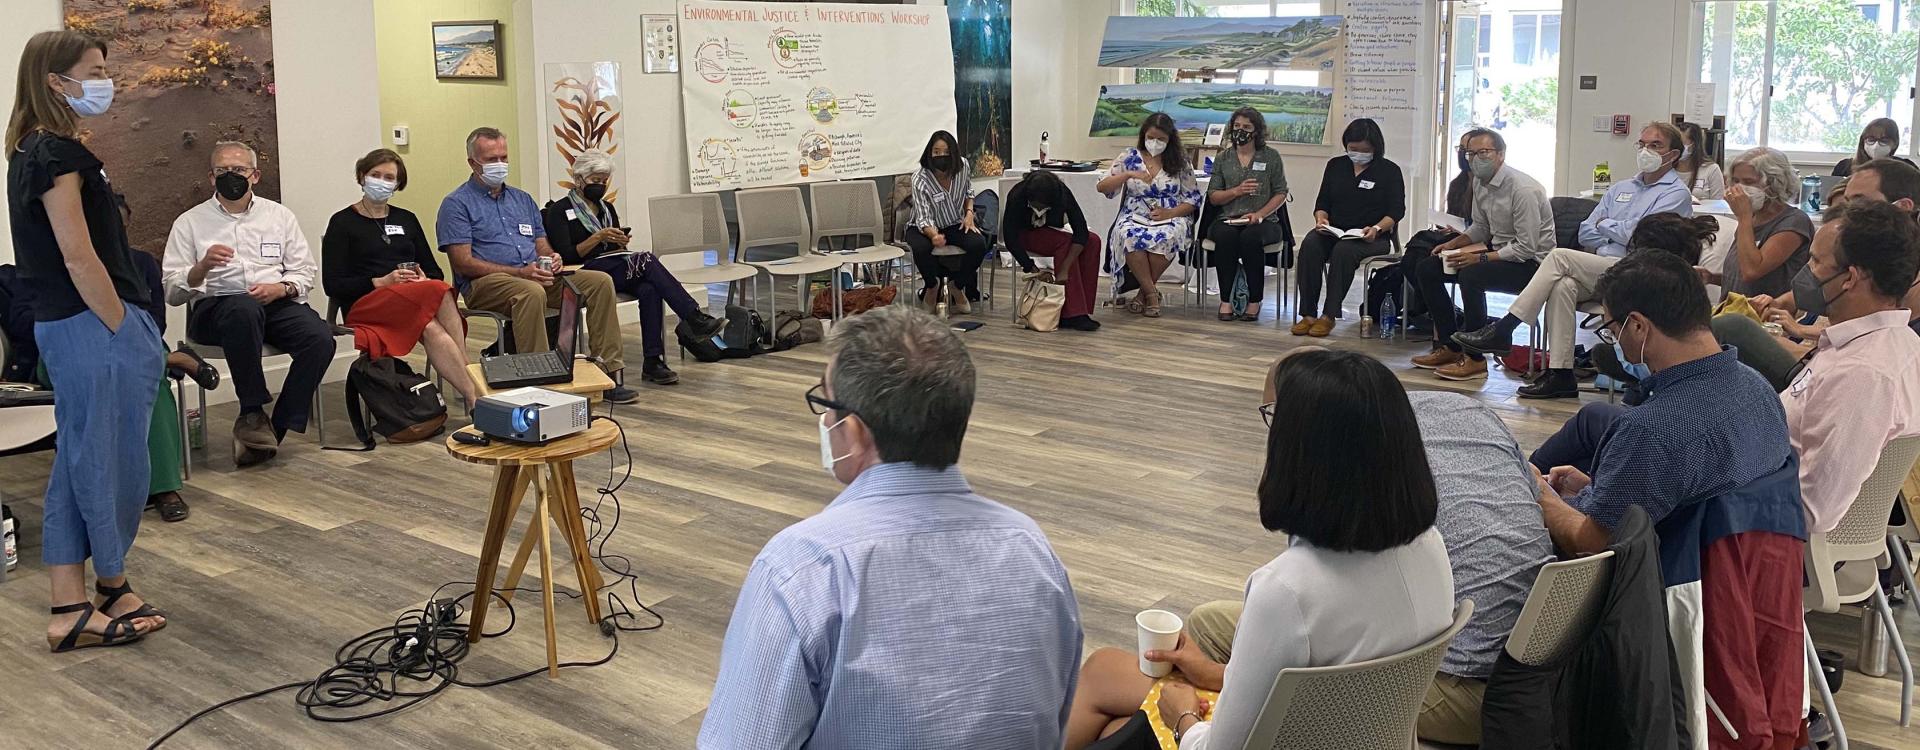 Researchers and Scholars gathered for workshop on environmental justice